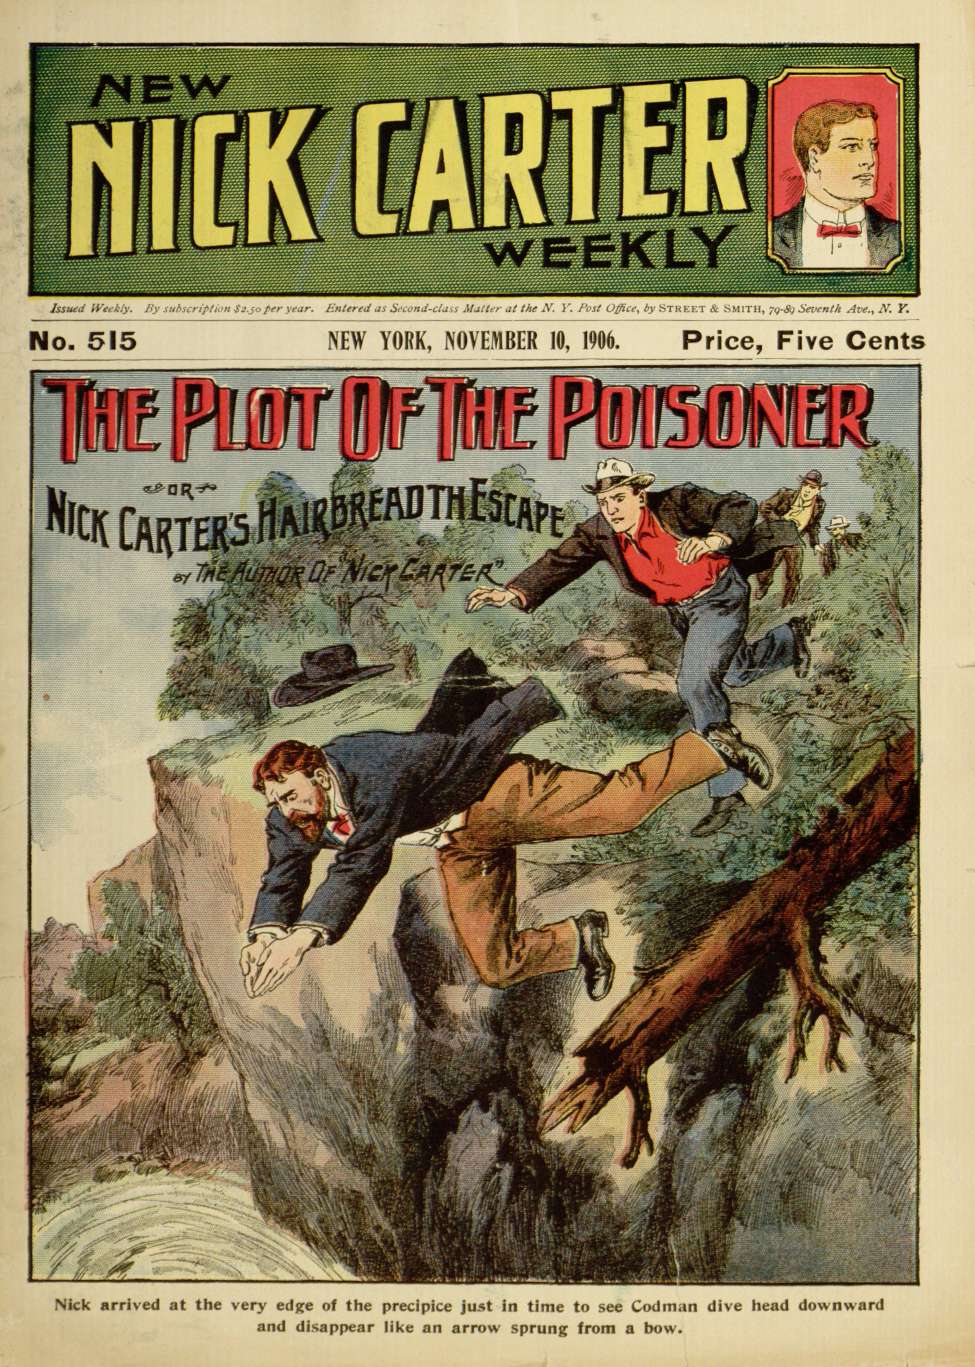 Book Cover For New Nick Carter Weekly 515 - Plot of the Poisoner